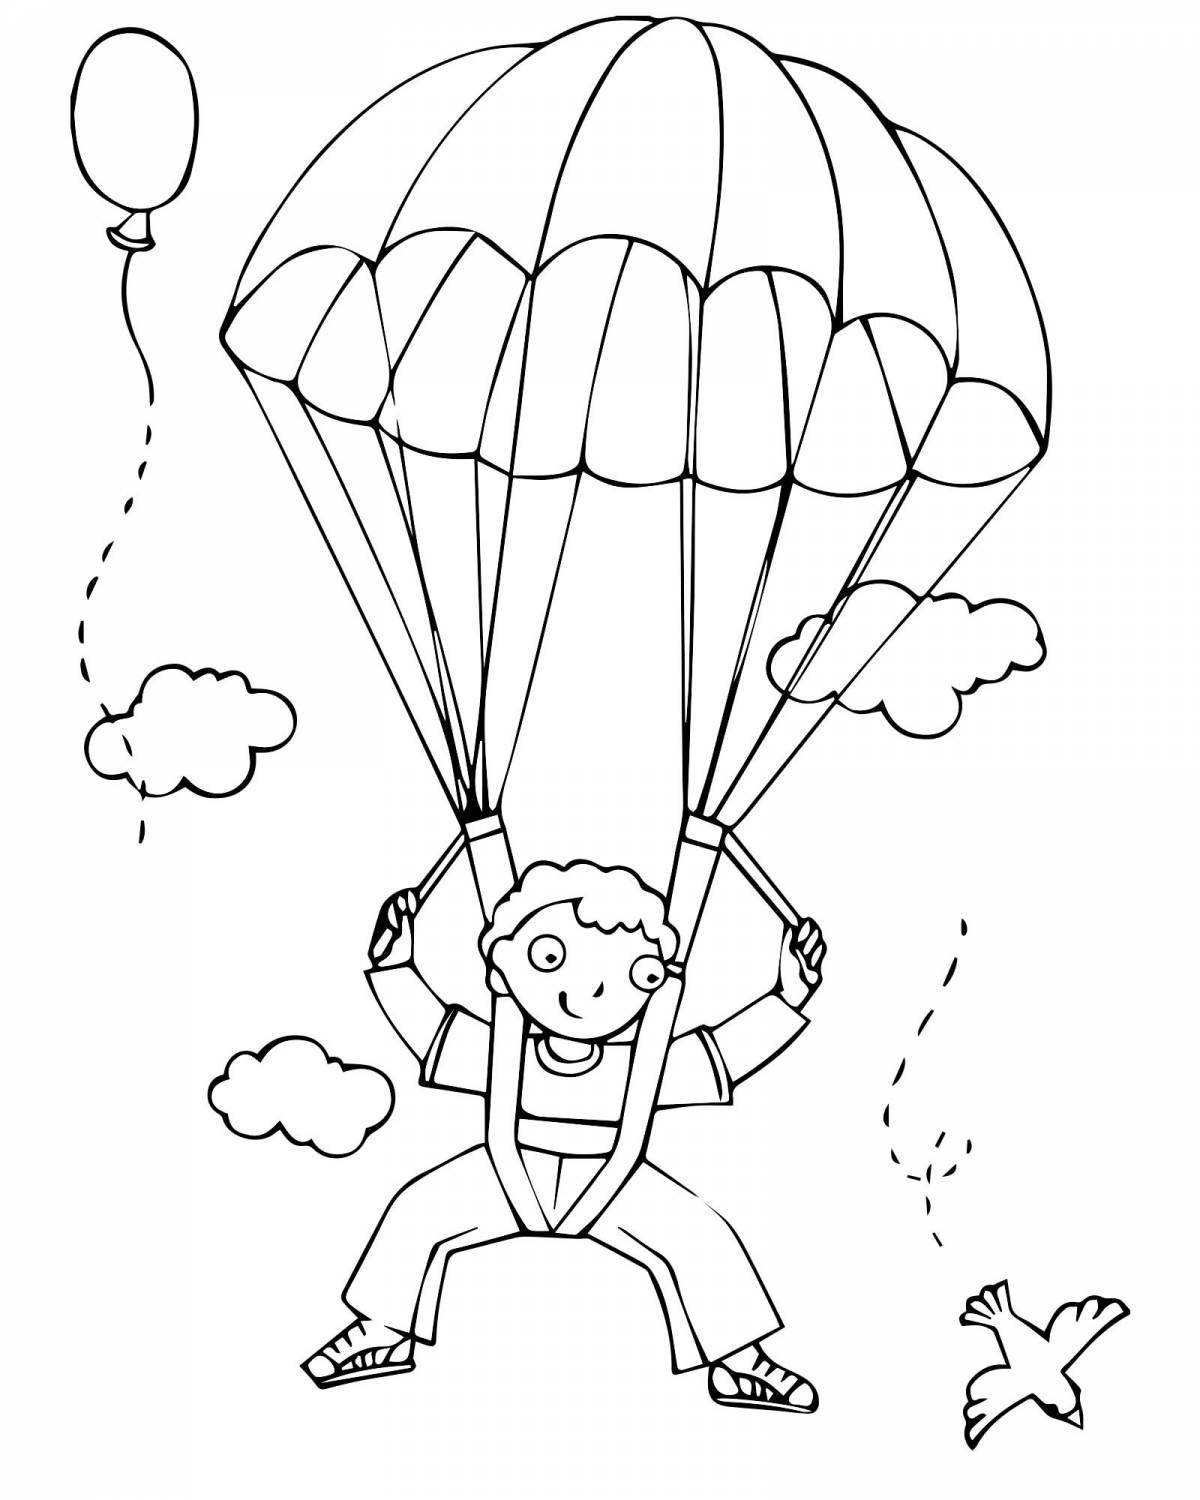 Outstanding paratrooper coloring page for toddlers